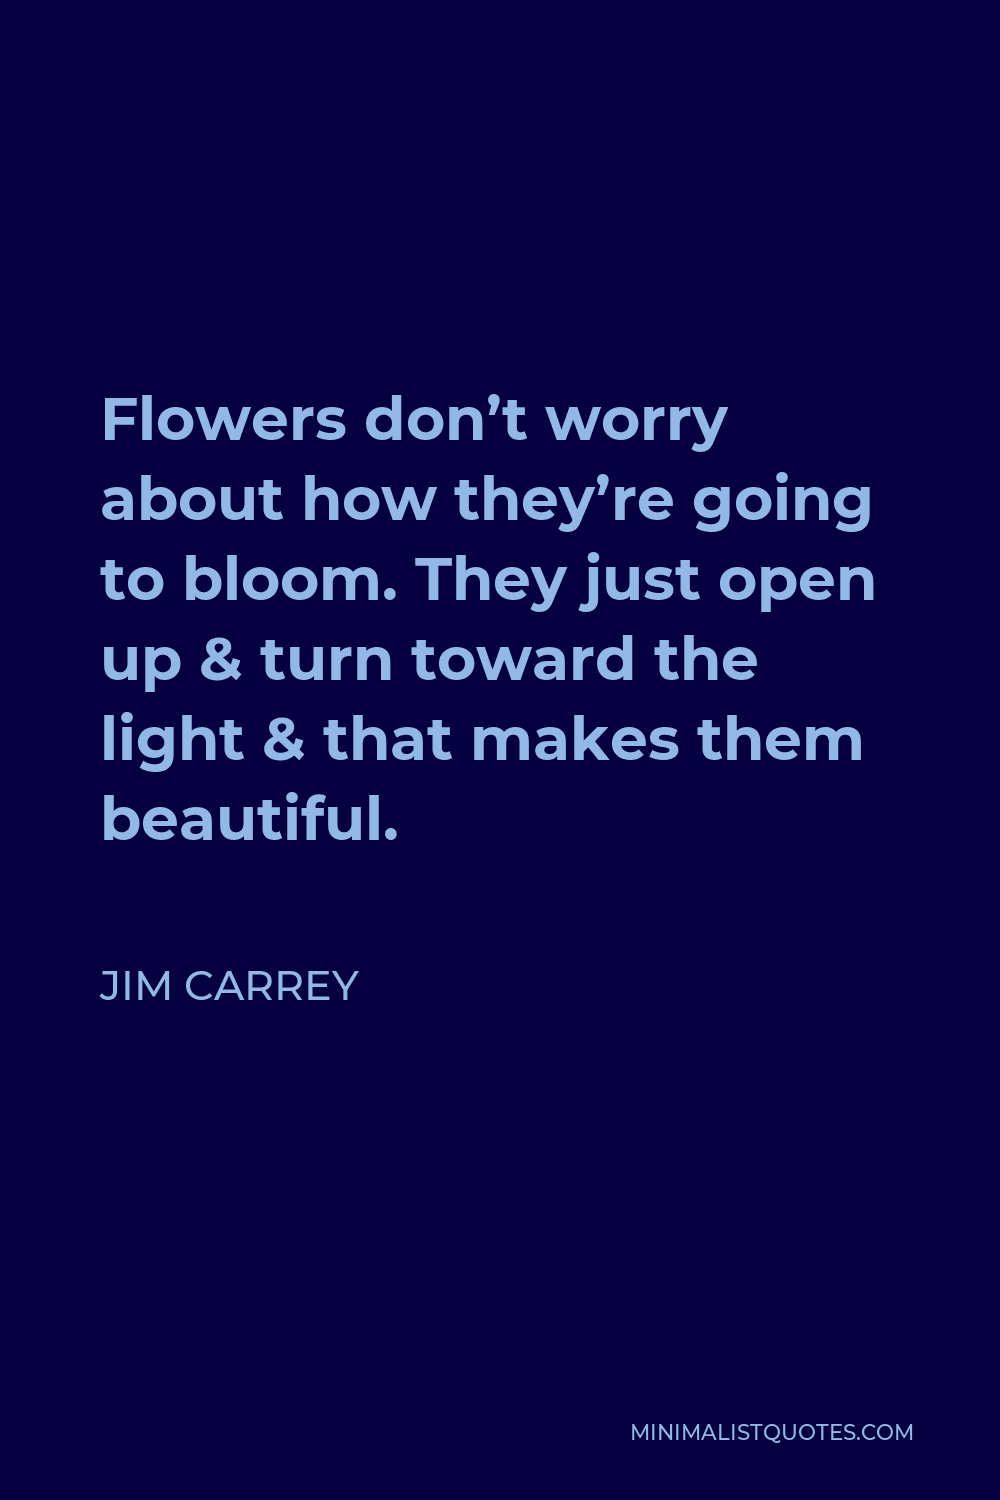 Jim Carrey Quote - Flowers don’t worry about how they’re going to bloom. They just open up & turn toward the light & that makes them beautiful.